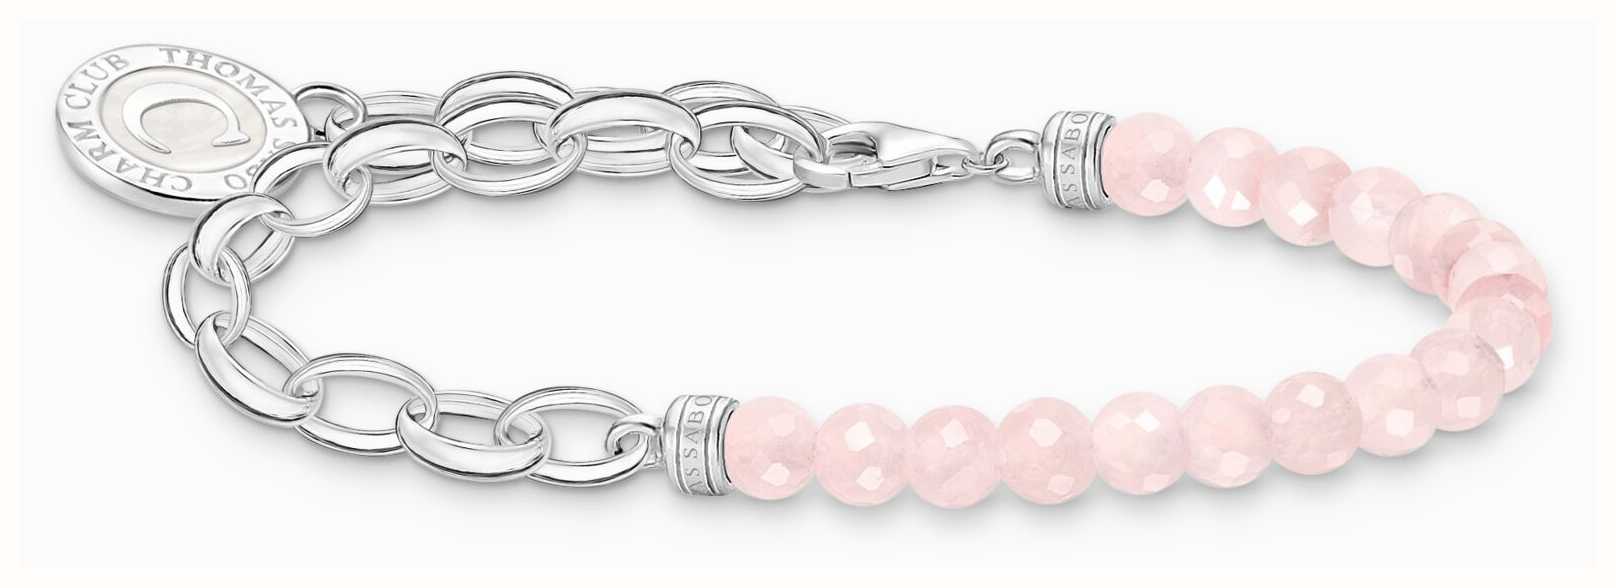 Thomas Sabo Women Freshwater Pearl Charm Bracelet, One Size, Sterling  Silver, Pearl : Amazon.com.au: Clothing, Shoes & Accessories